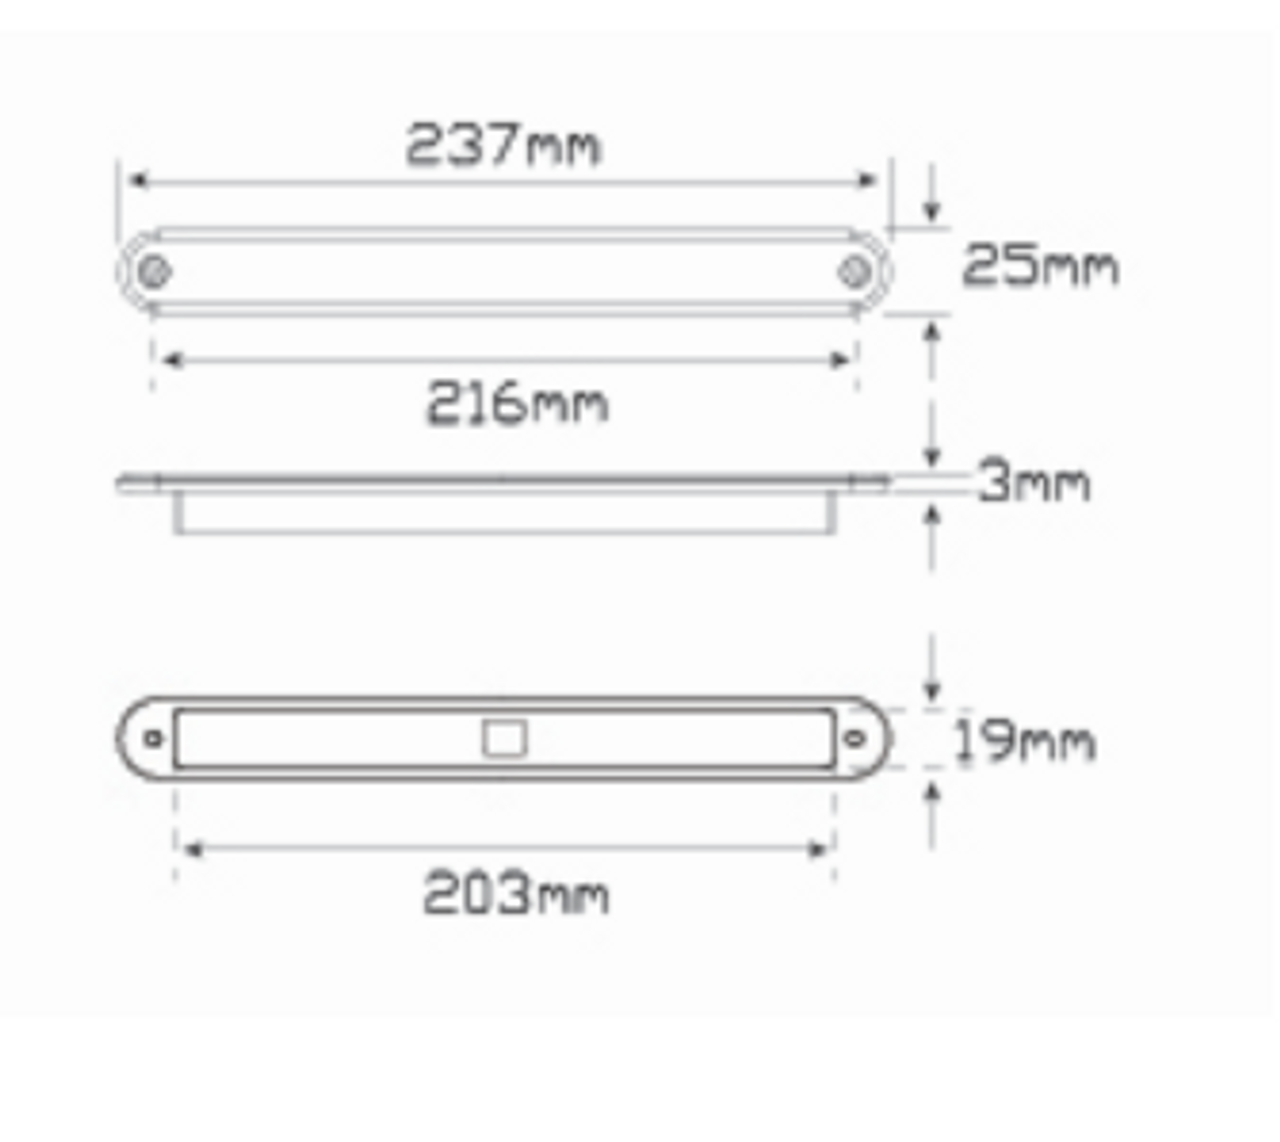 Line Drawing - 235A24 - Slimline, Low Profile Design. Rear Indicator. Recessed Mount, Screw Secured. 24v Only. Coloured Lens. Autolamp. Ultimate LED.